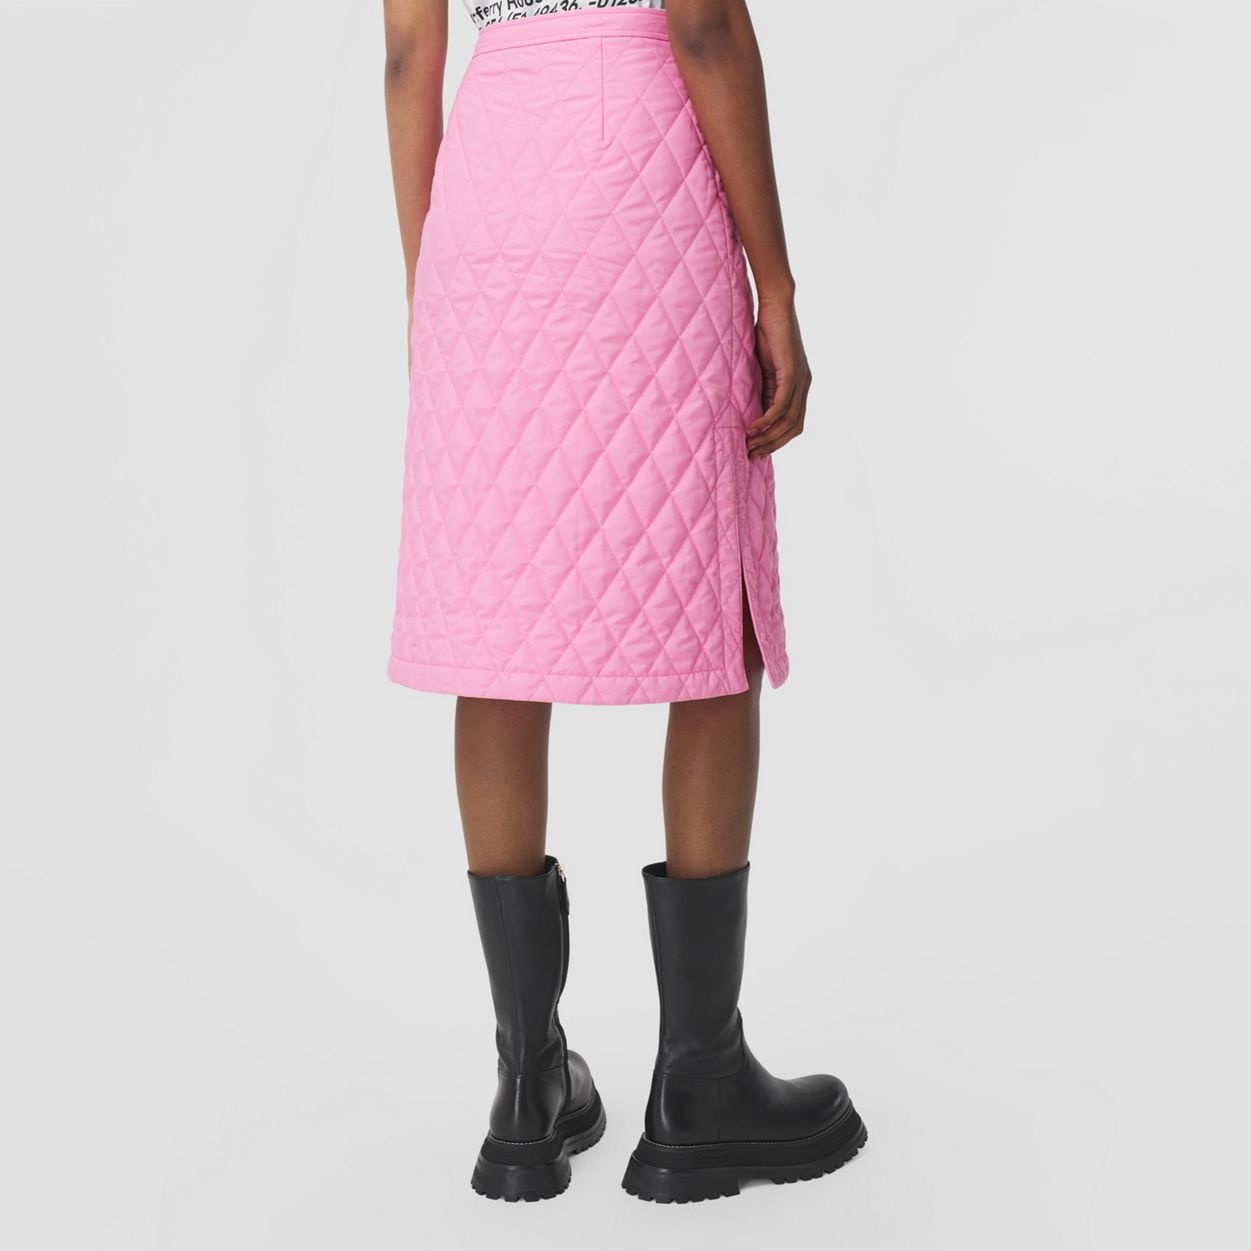 Diamond Quilted Skirt - 4